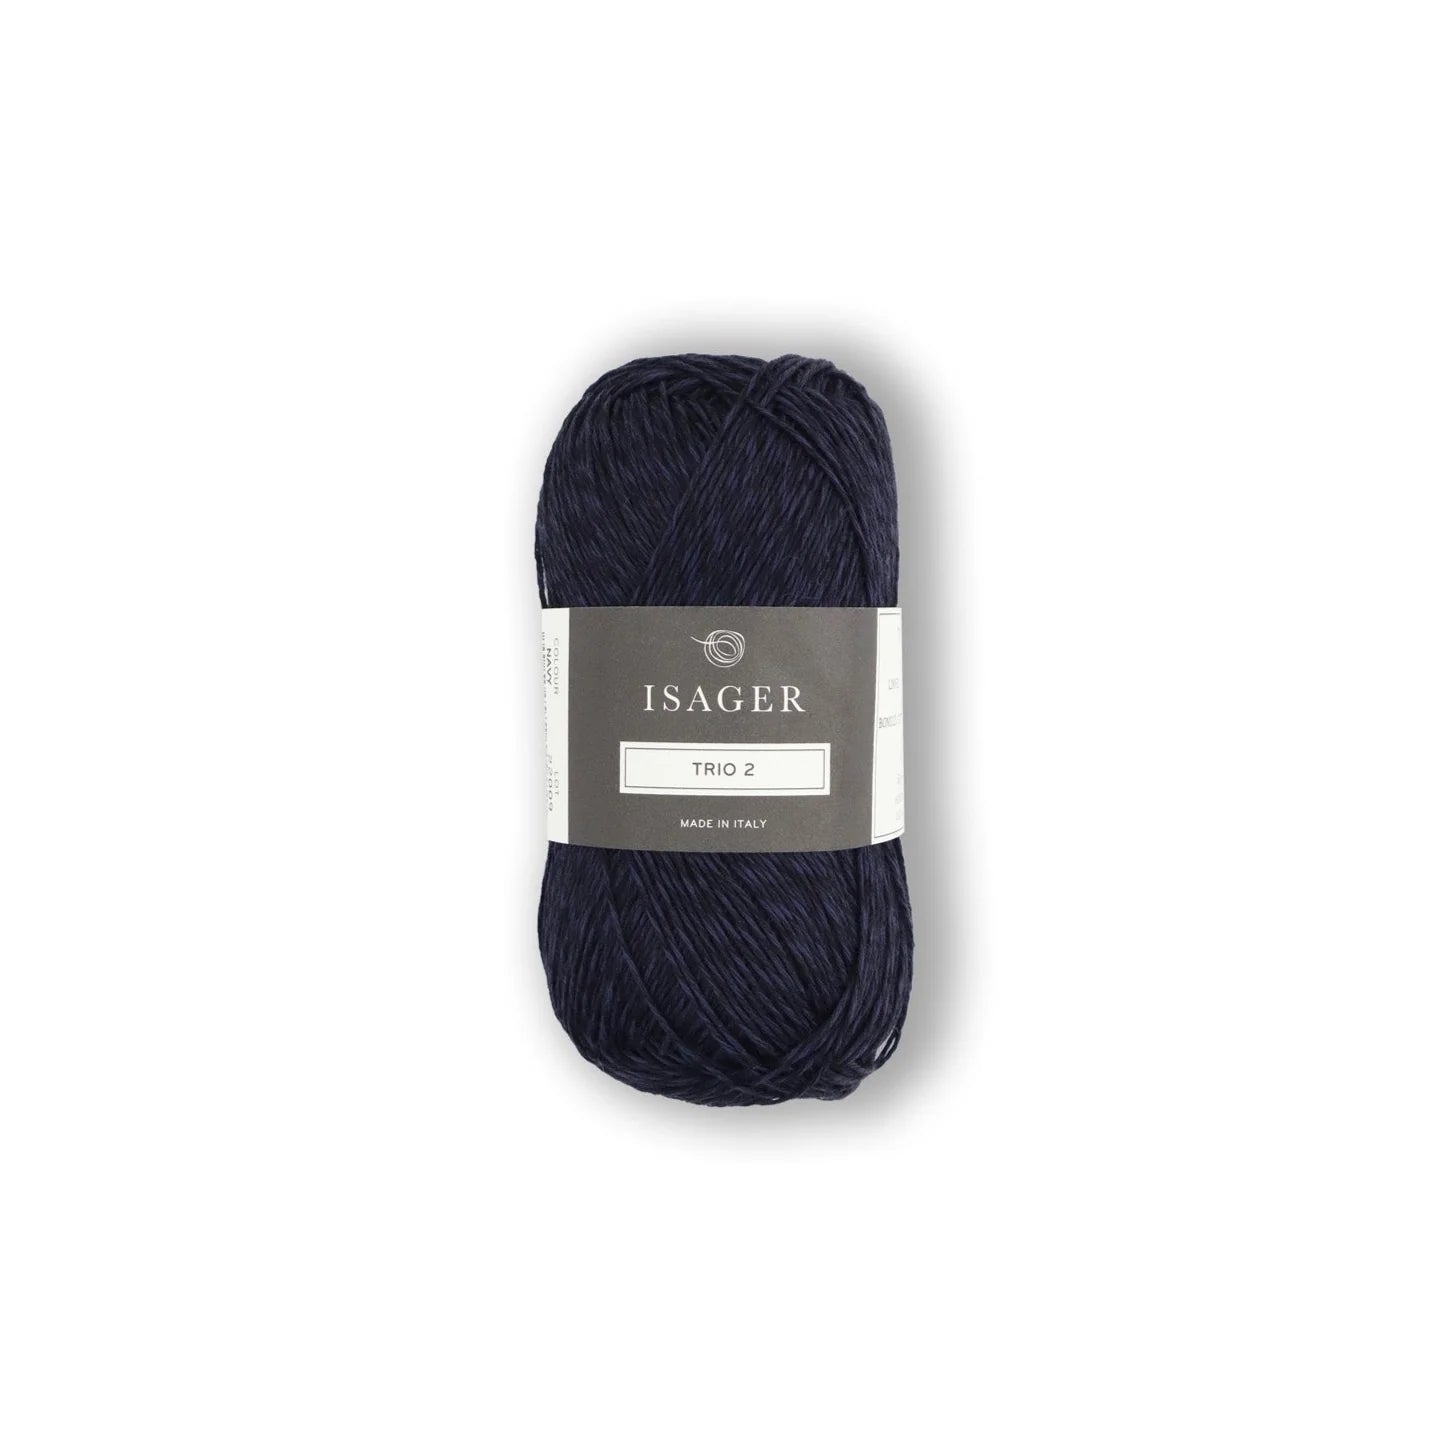 Isager Trio 2 - Navy - 5 Ply - Cotton - The Little Yarn Store